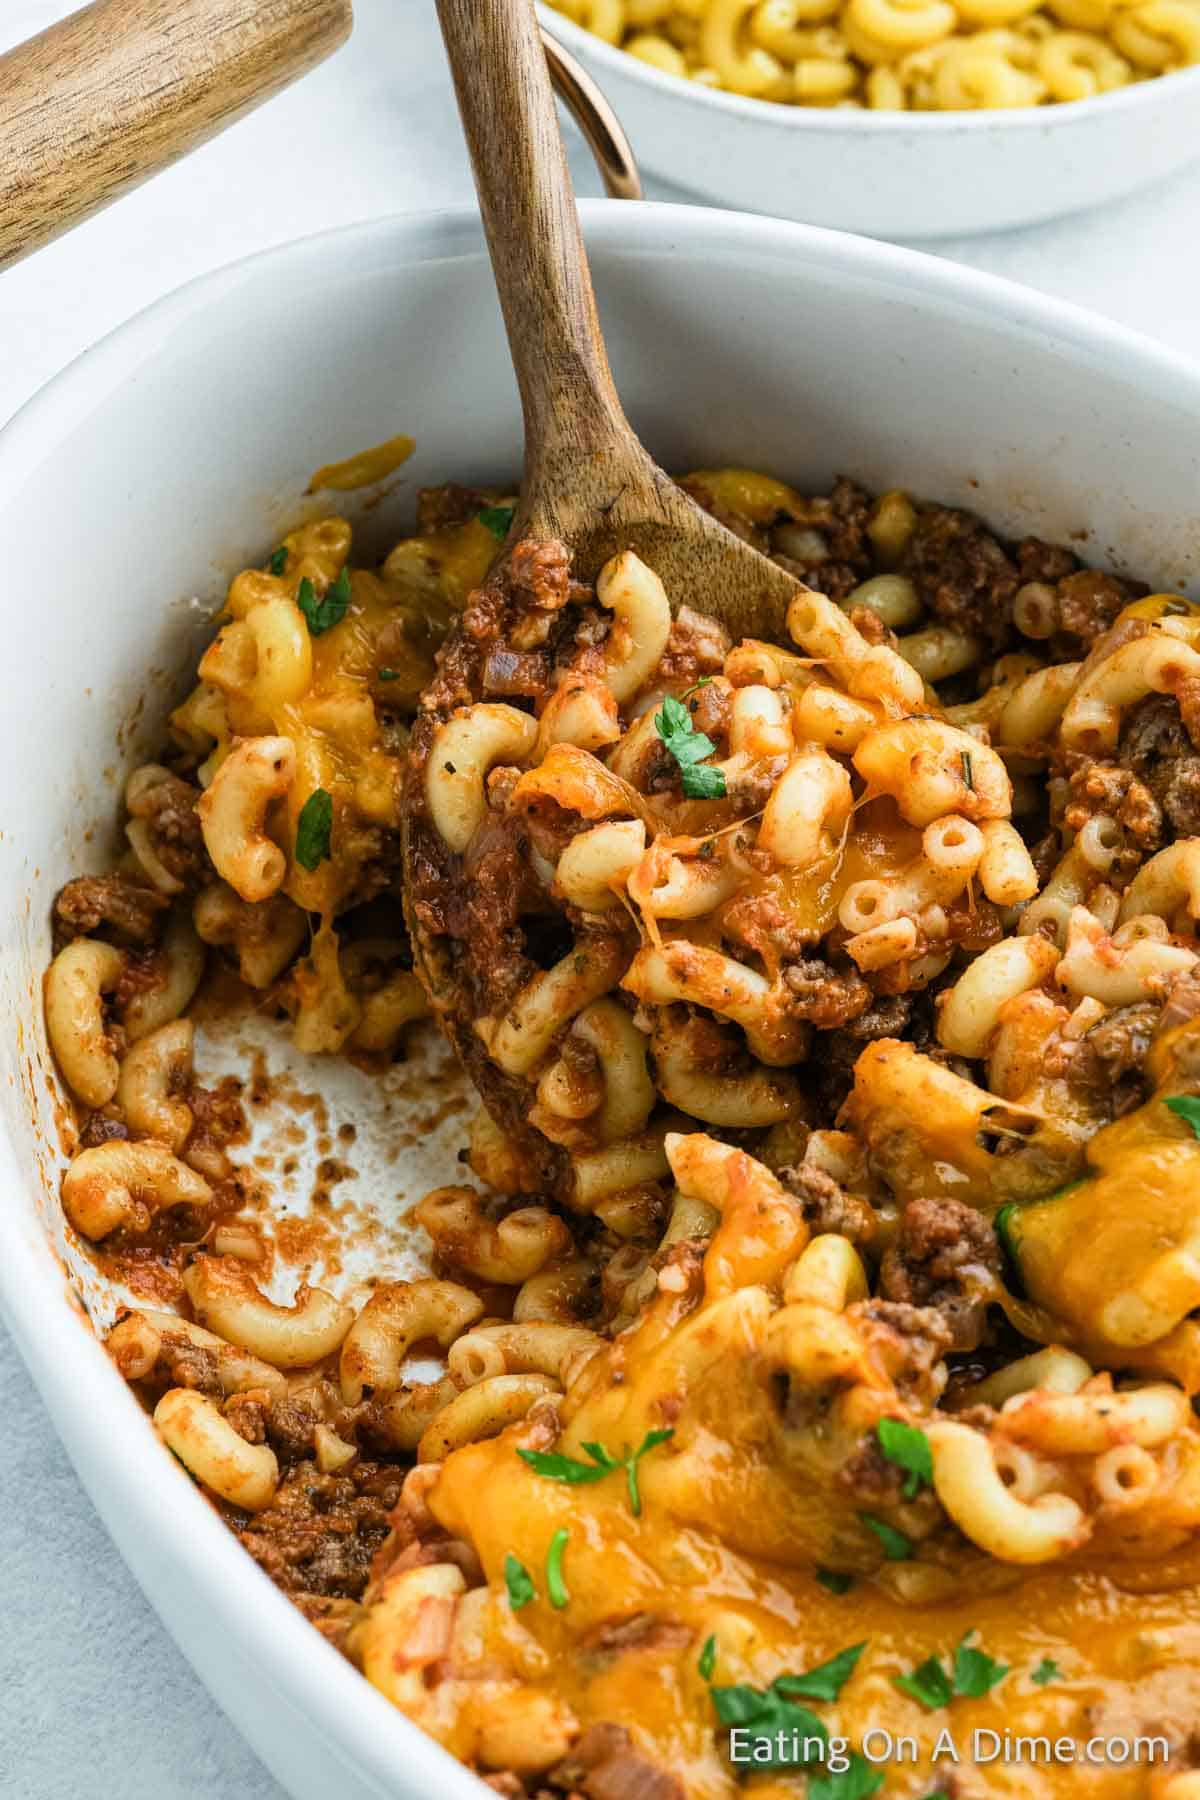 Hamburger Casserole in a casserole dish with a wooden spoon and topped with melted cheese